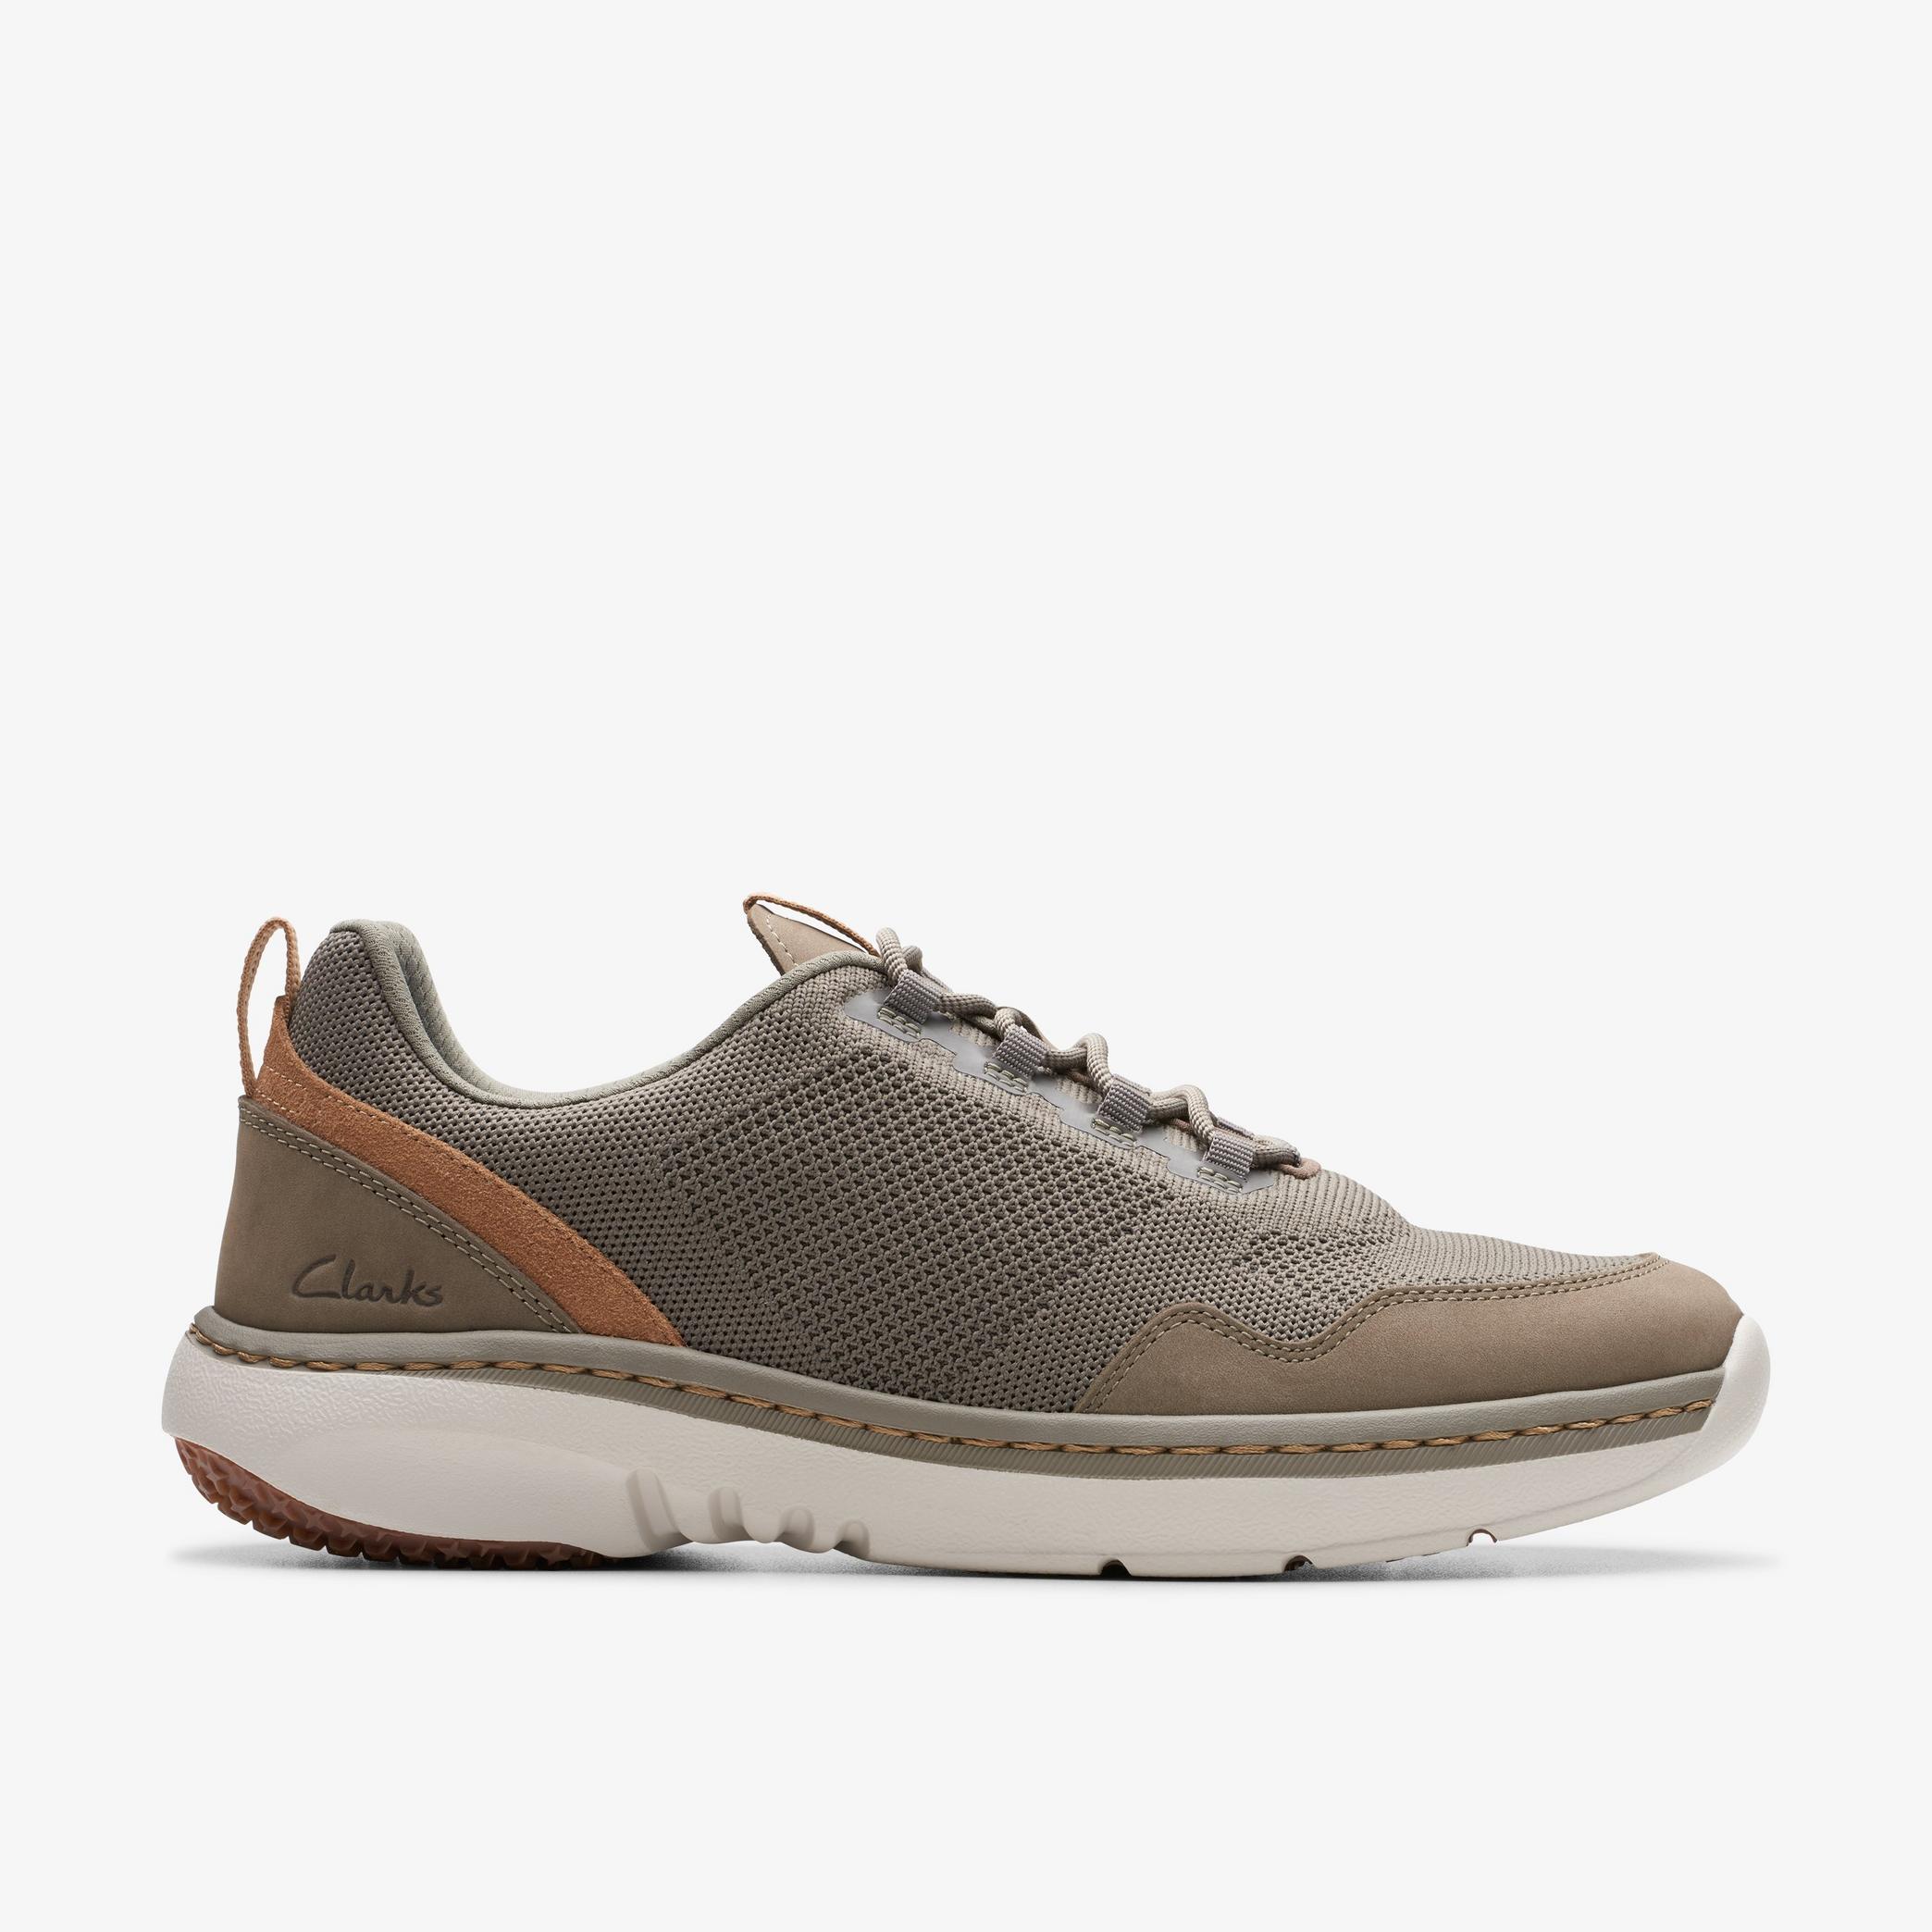 Clarks Pro Knit Stone Combination Sneakers, view 1 of 6